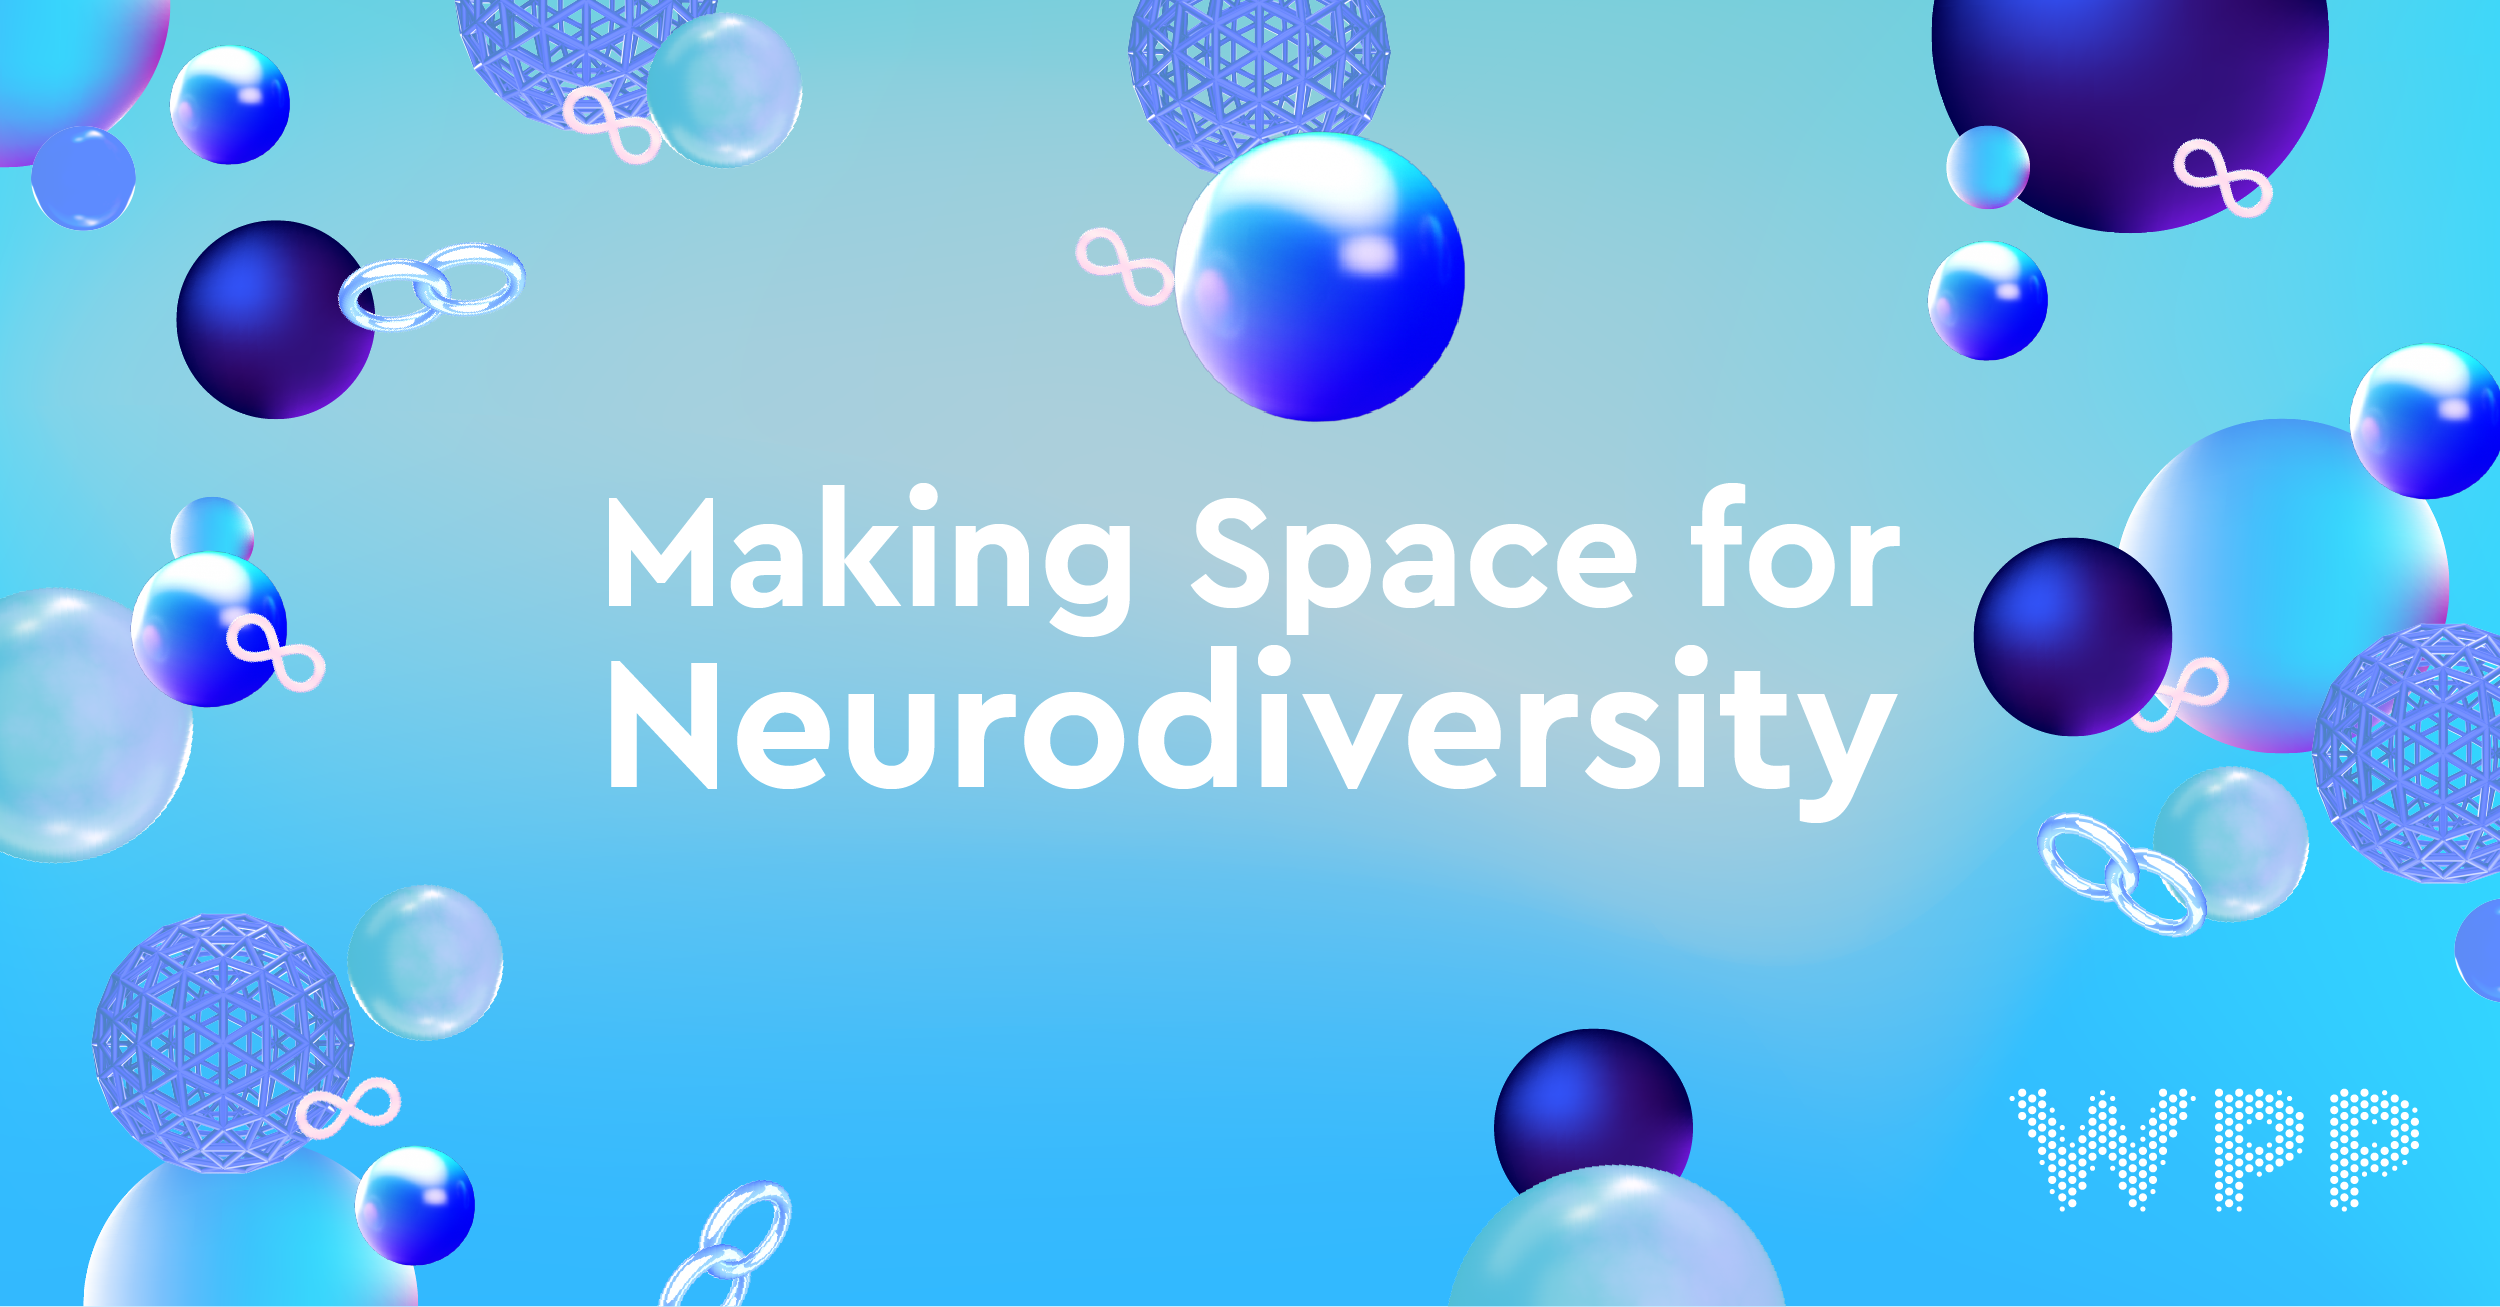 Blue spheres on a light blue background with the text 'Making Space for Neurodiversity' and a WPP logo 